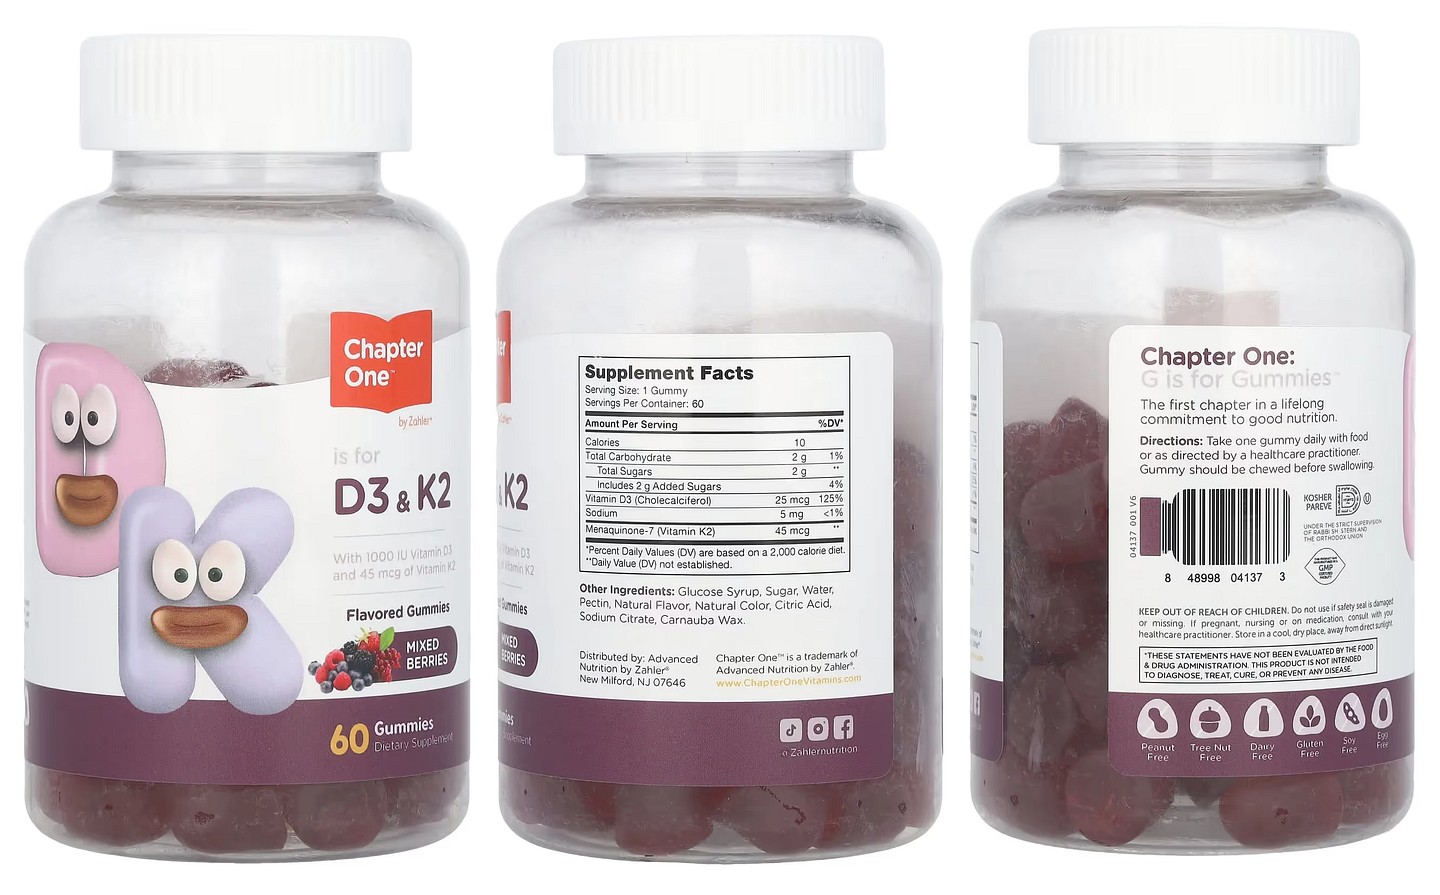 Chapter One, D3 & K2, Mixed Berries packaging